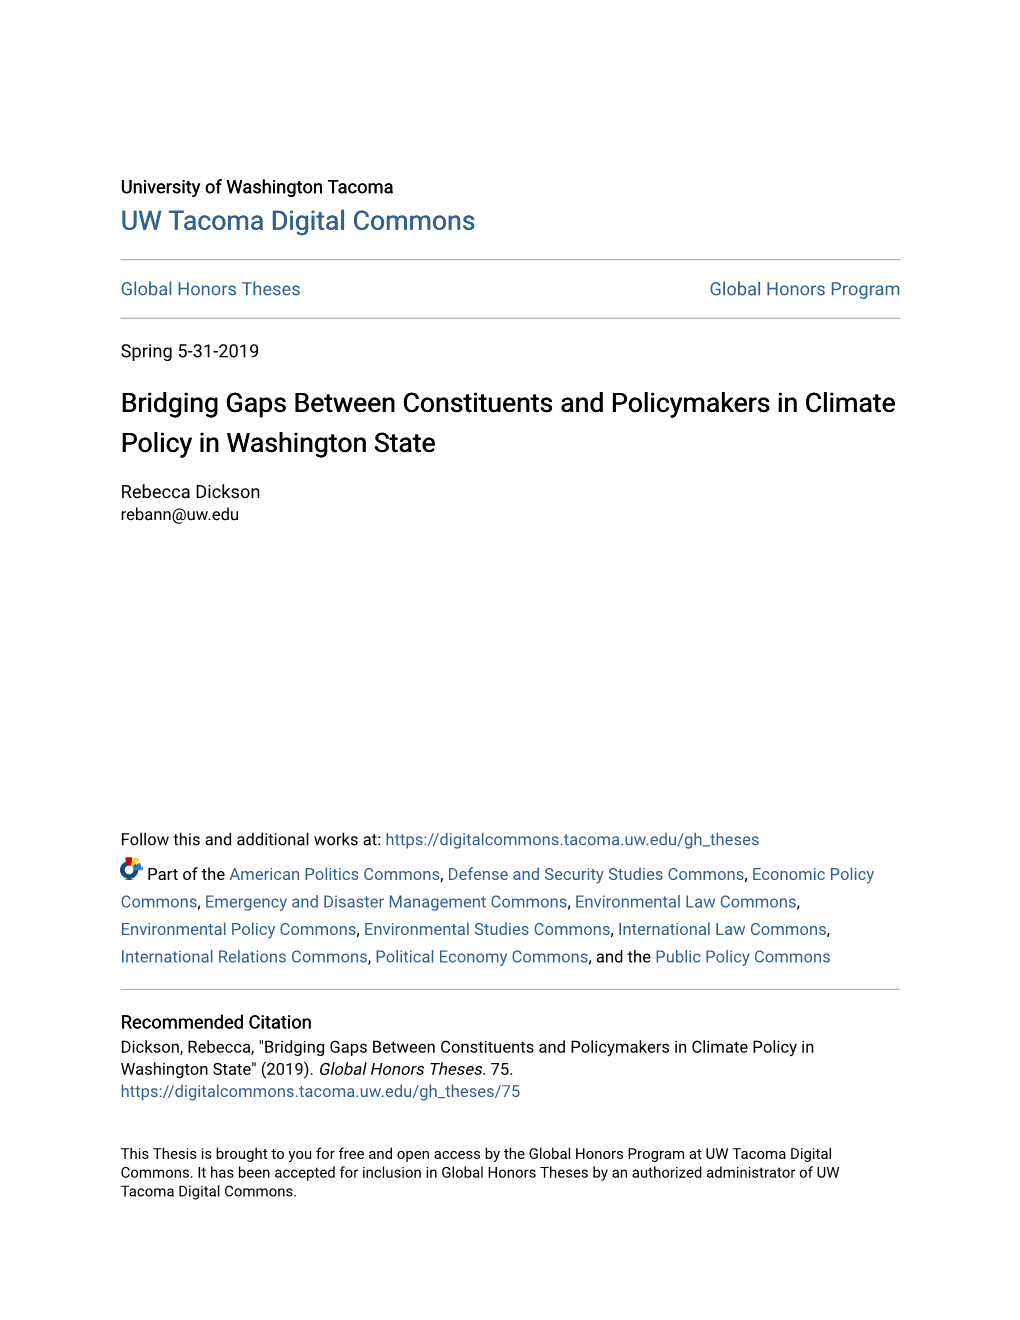 Bridging Gaps Between Constituents and Policymakers in Climate Policy in Washington State